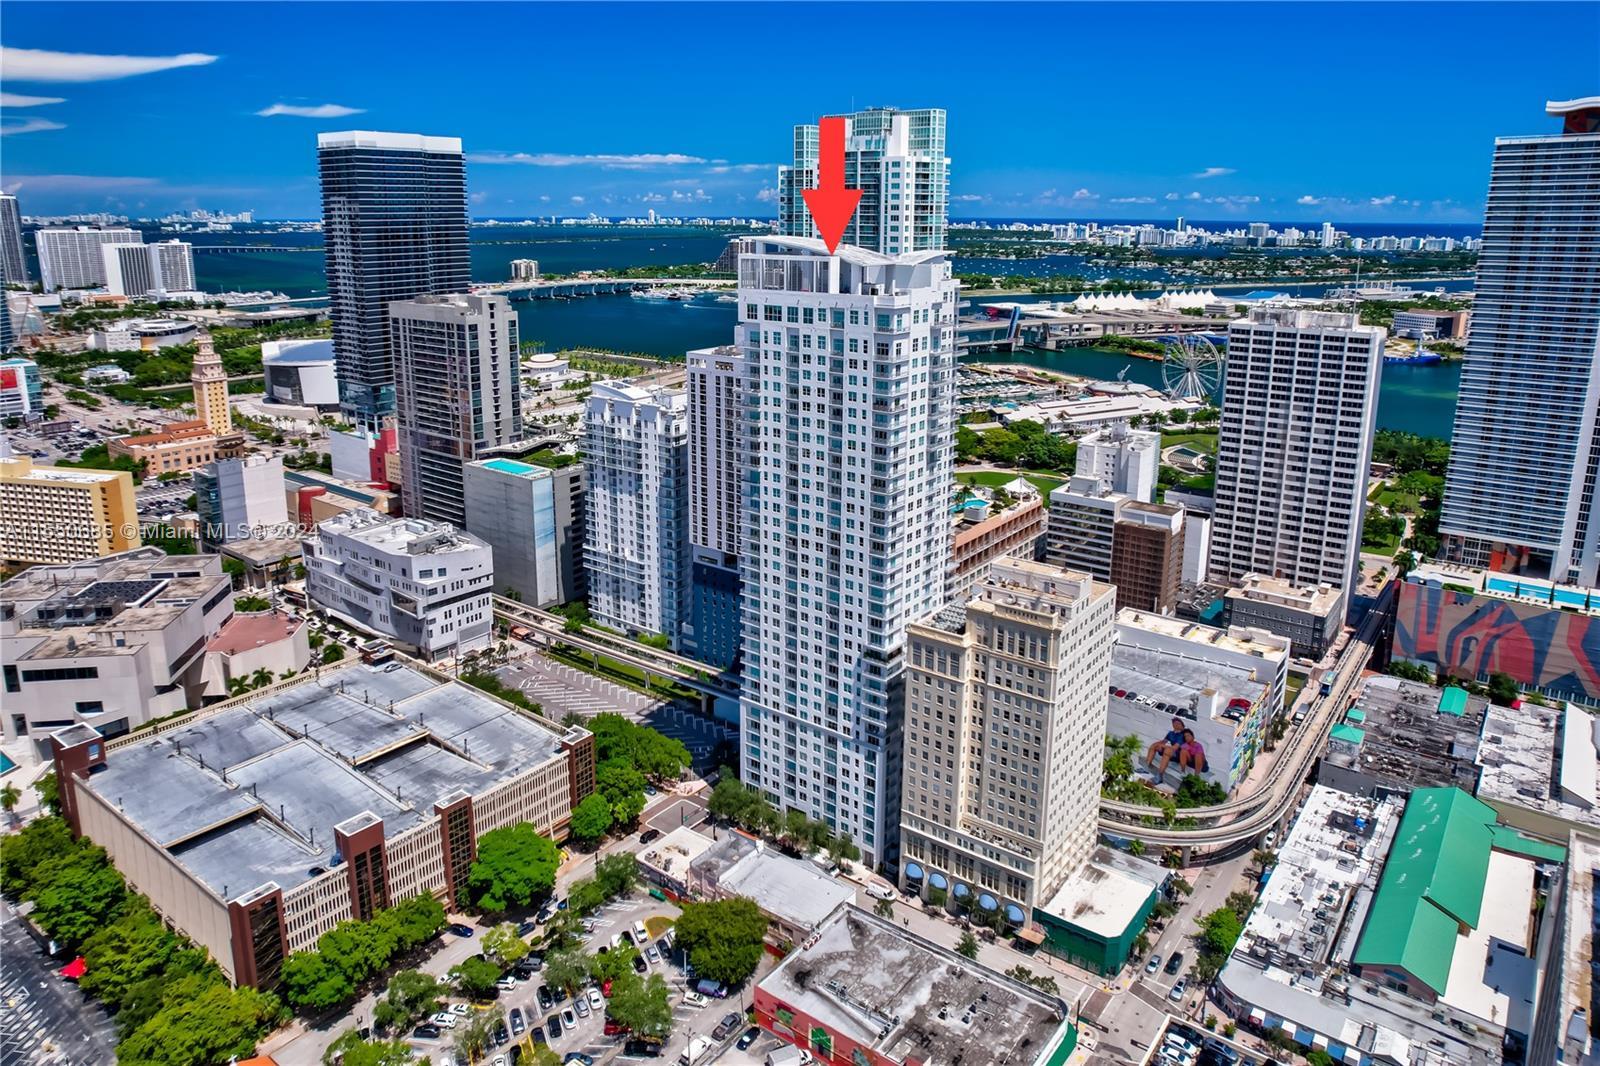 Discover modern urban living in Downtown Miami at The Loft Downtown II. This 2BD/2BA condo offers sk